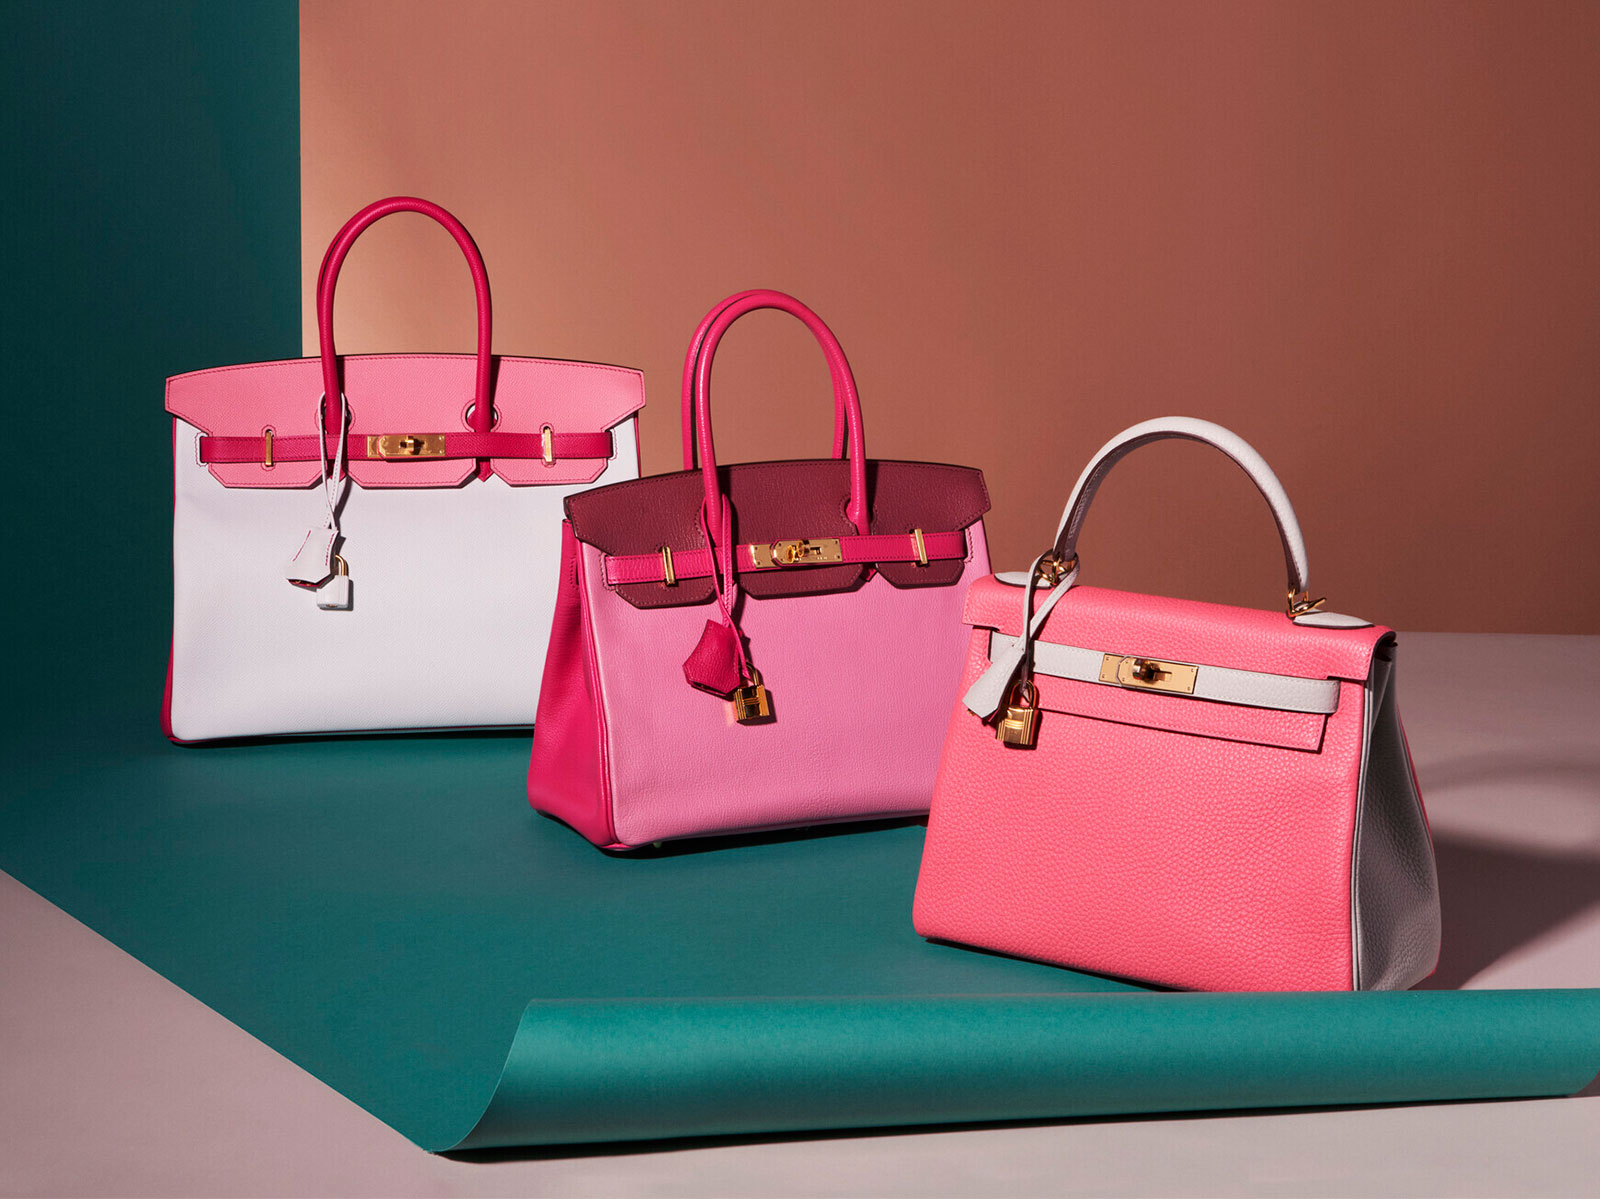 Perfect for Summer: The Canvas Birkin or Kelly Bag, Handbags & Accessories